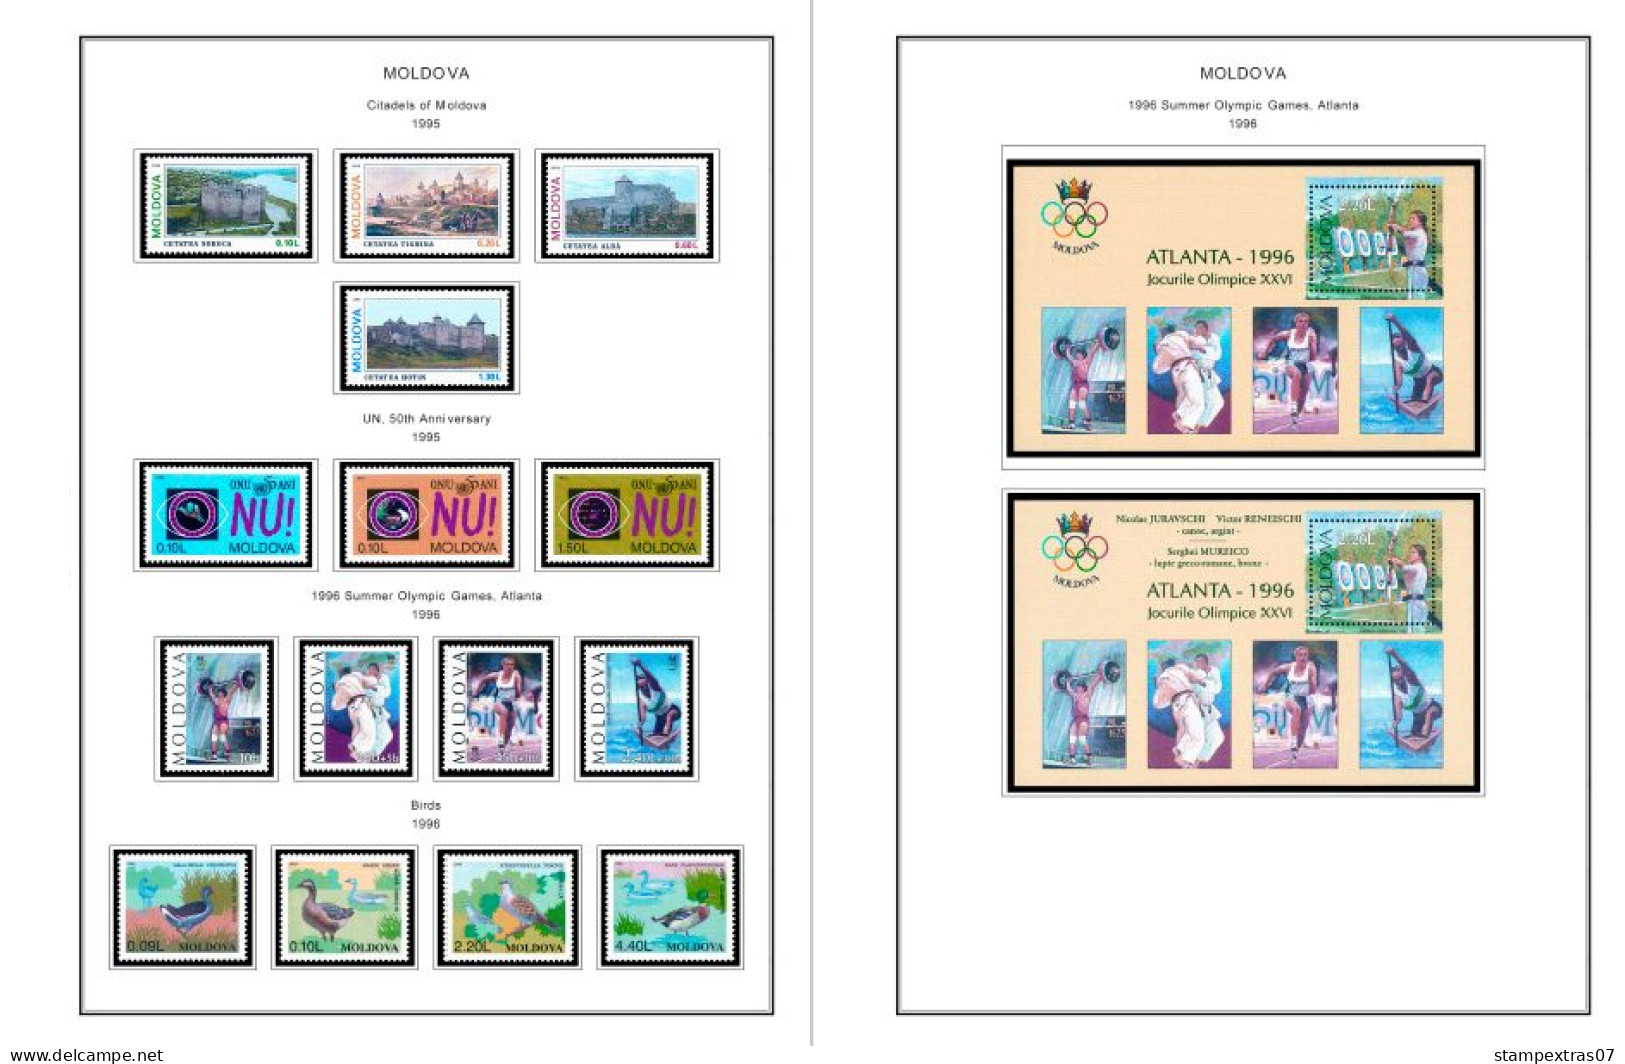 COLOR PRINTED MOLDOVA 1991-2010 STAMP ALBUM PAGES (92 illustrated pages) >> FEUILLES ALBUM